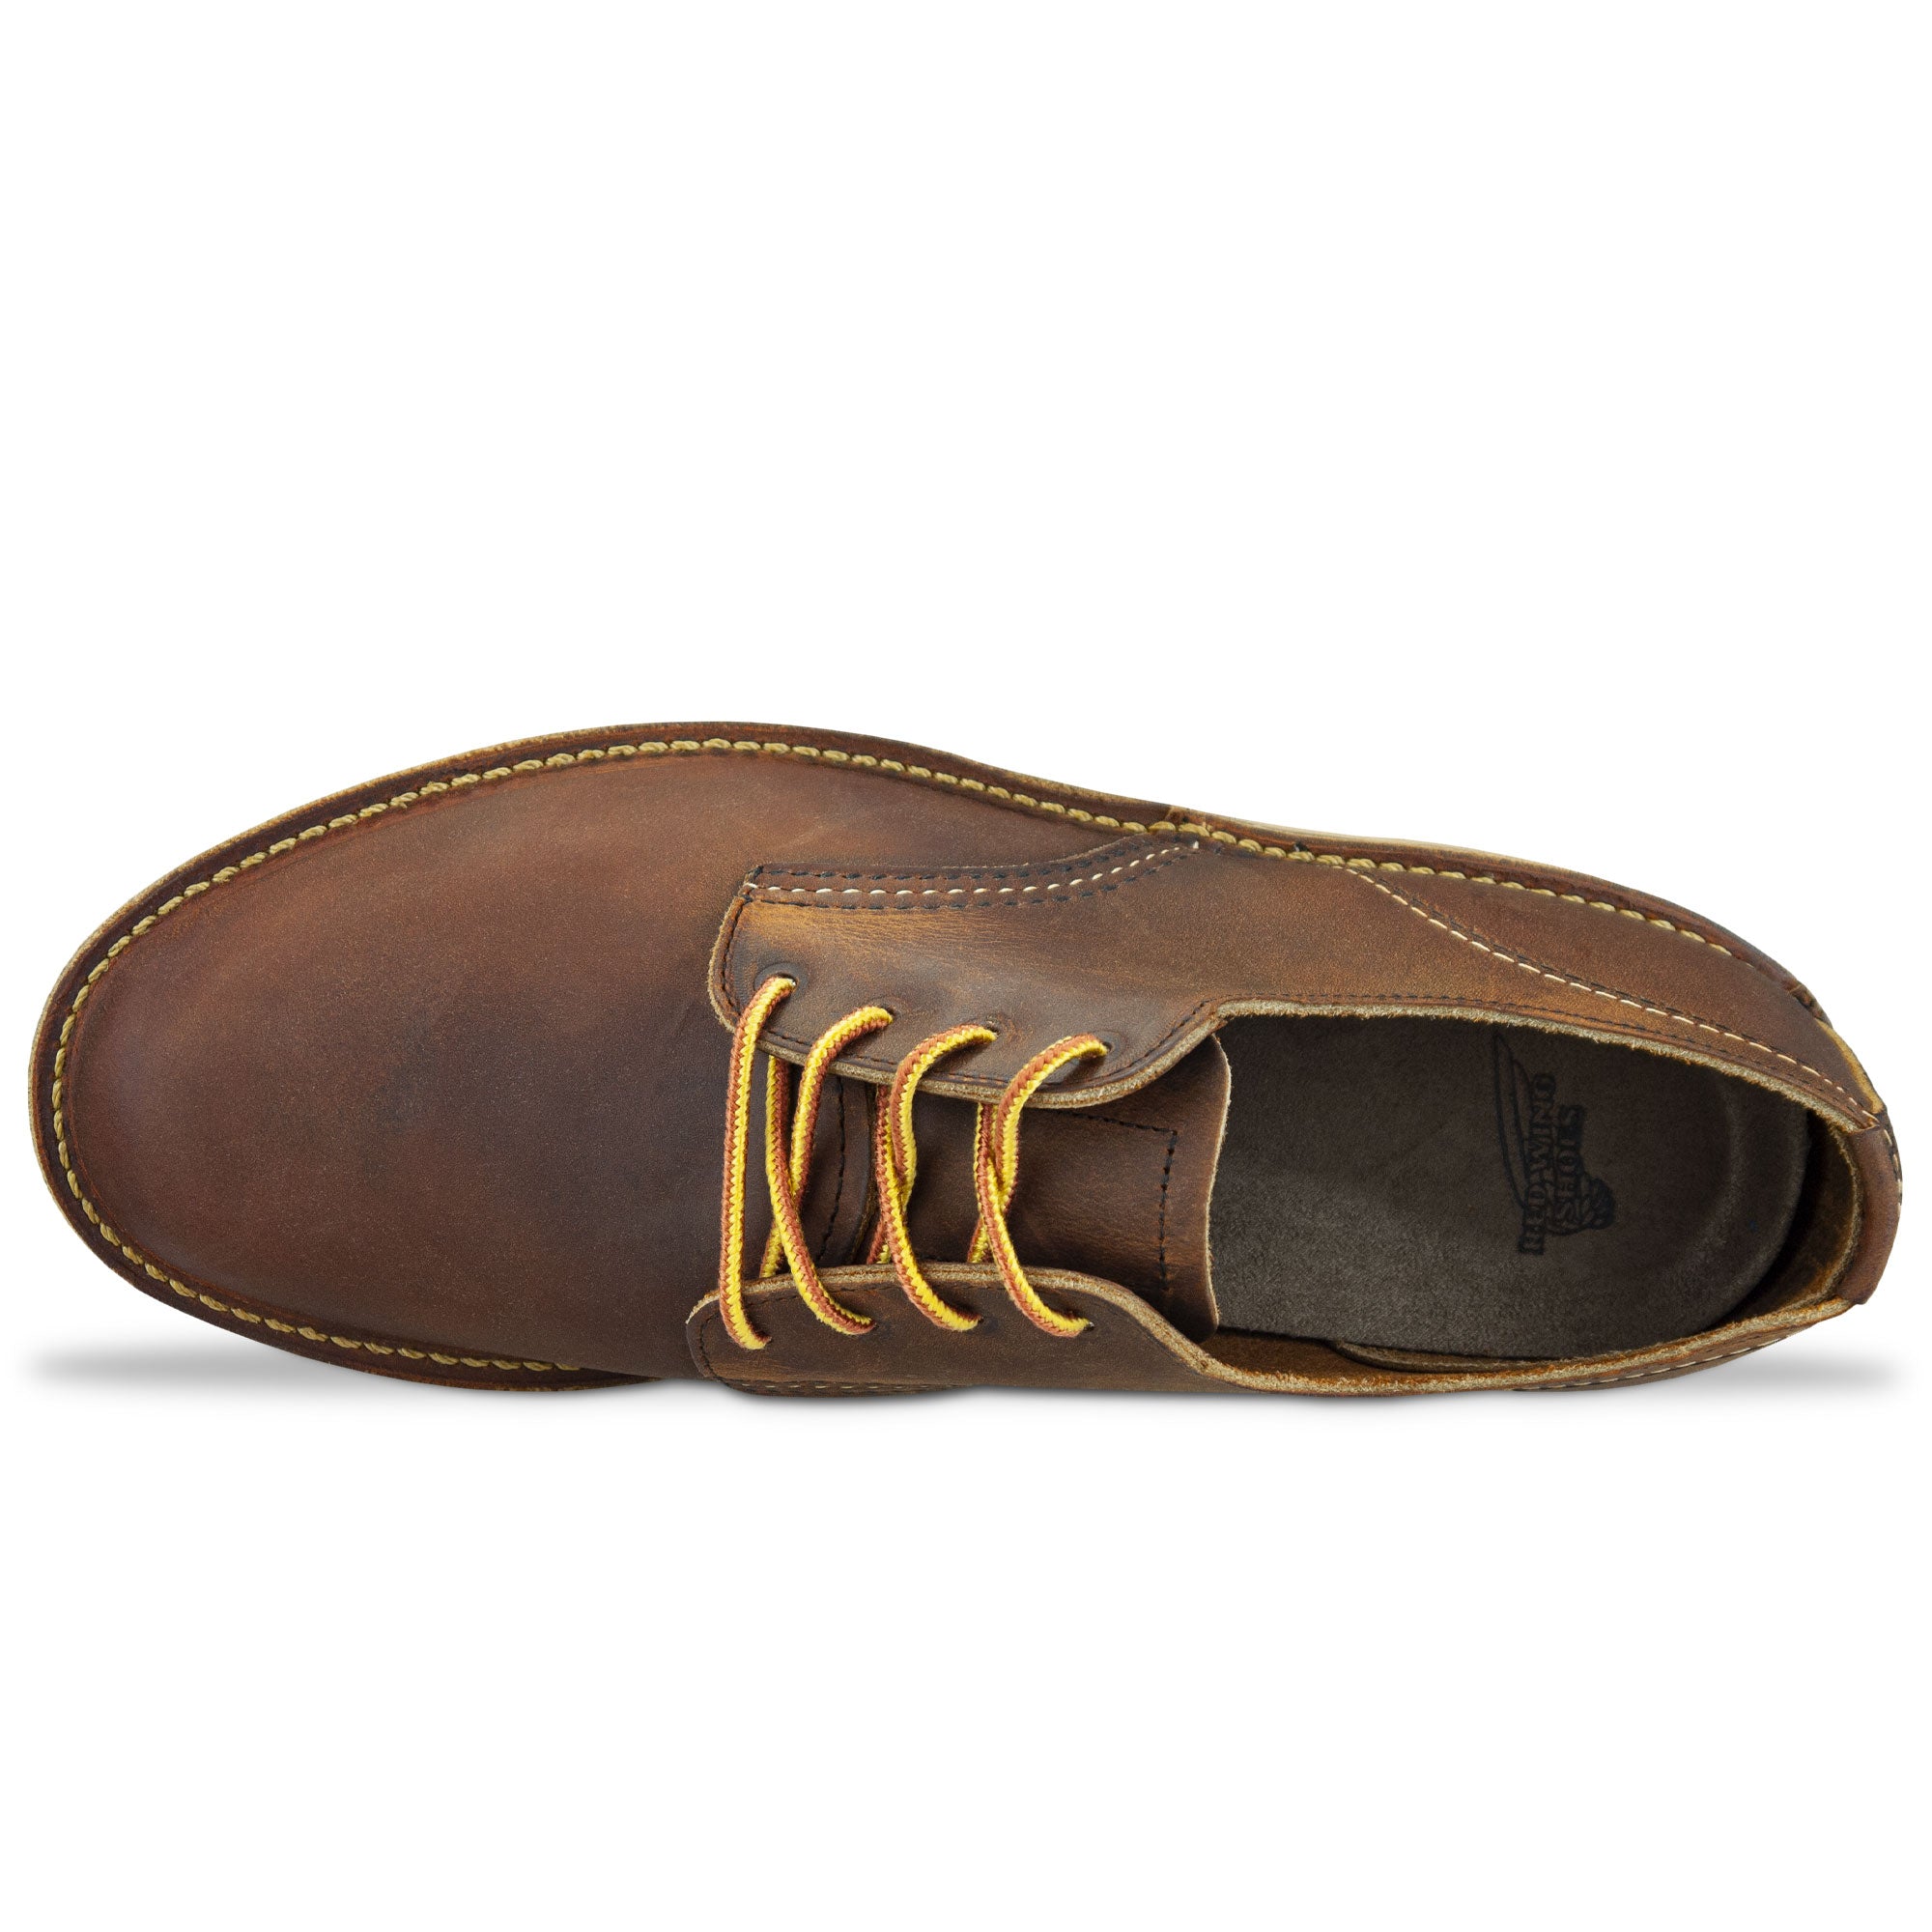 Red Wing 3303 Weekender Oxford Shoe - Copper Rough & Tough